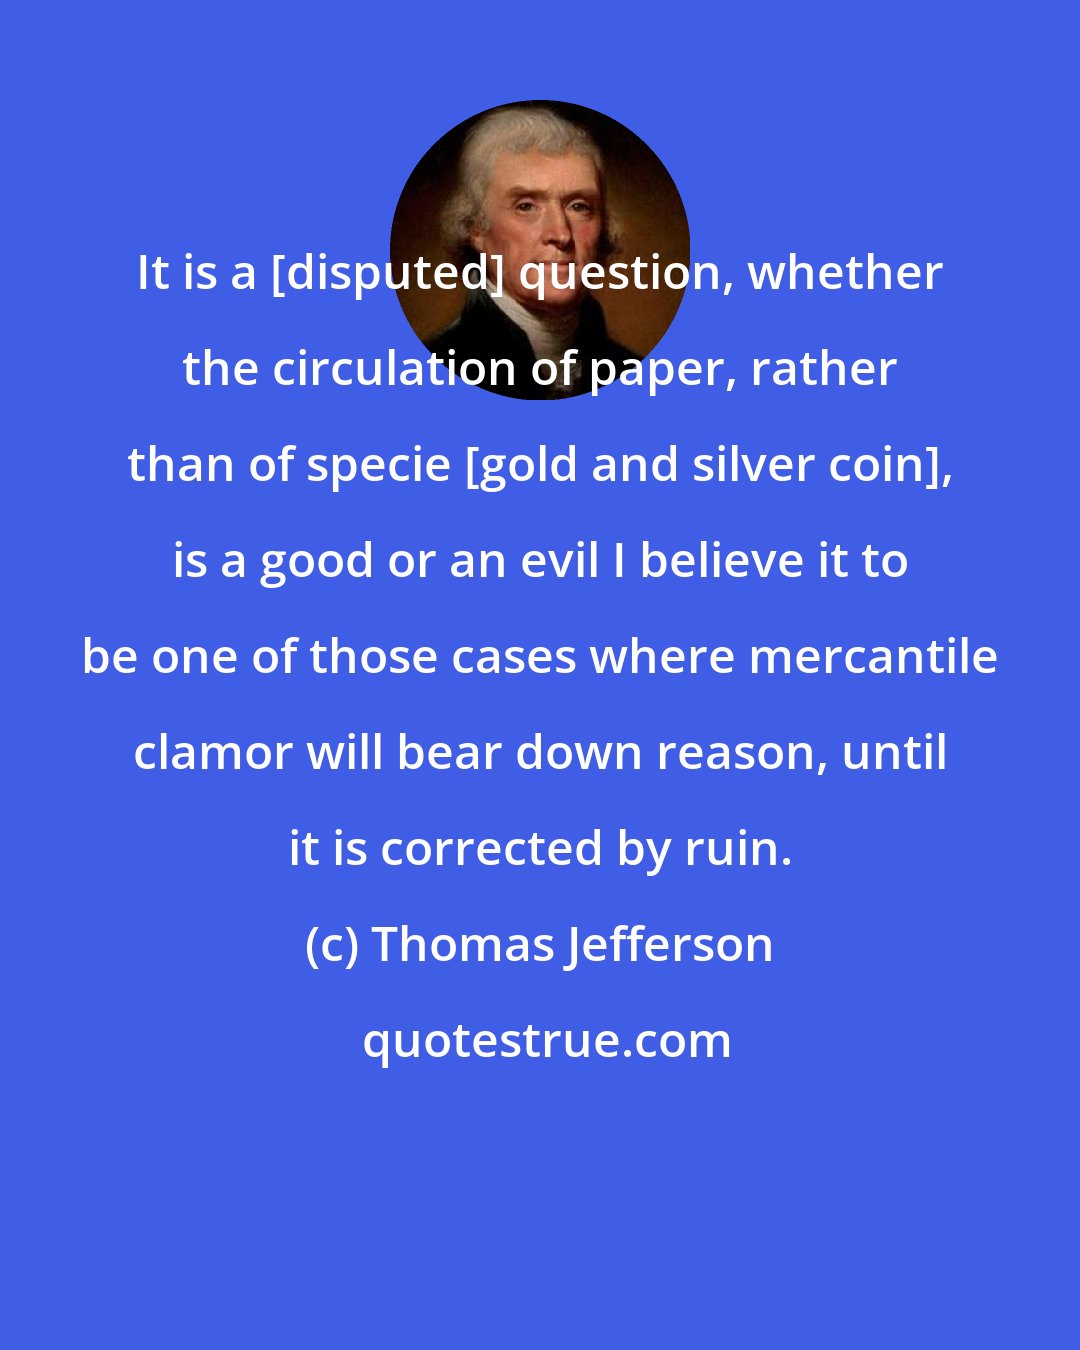 Thomas Jefferson: It is a [disputed] question, whether the circulation of paper, rather than of specie [gold and silver coin], is a good or an evil I believe it to be one of those cases where mercantile clamor will bear down reason, until it is corrected by ruin.